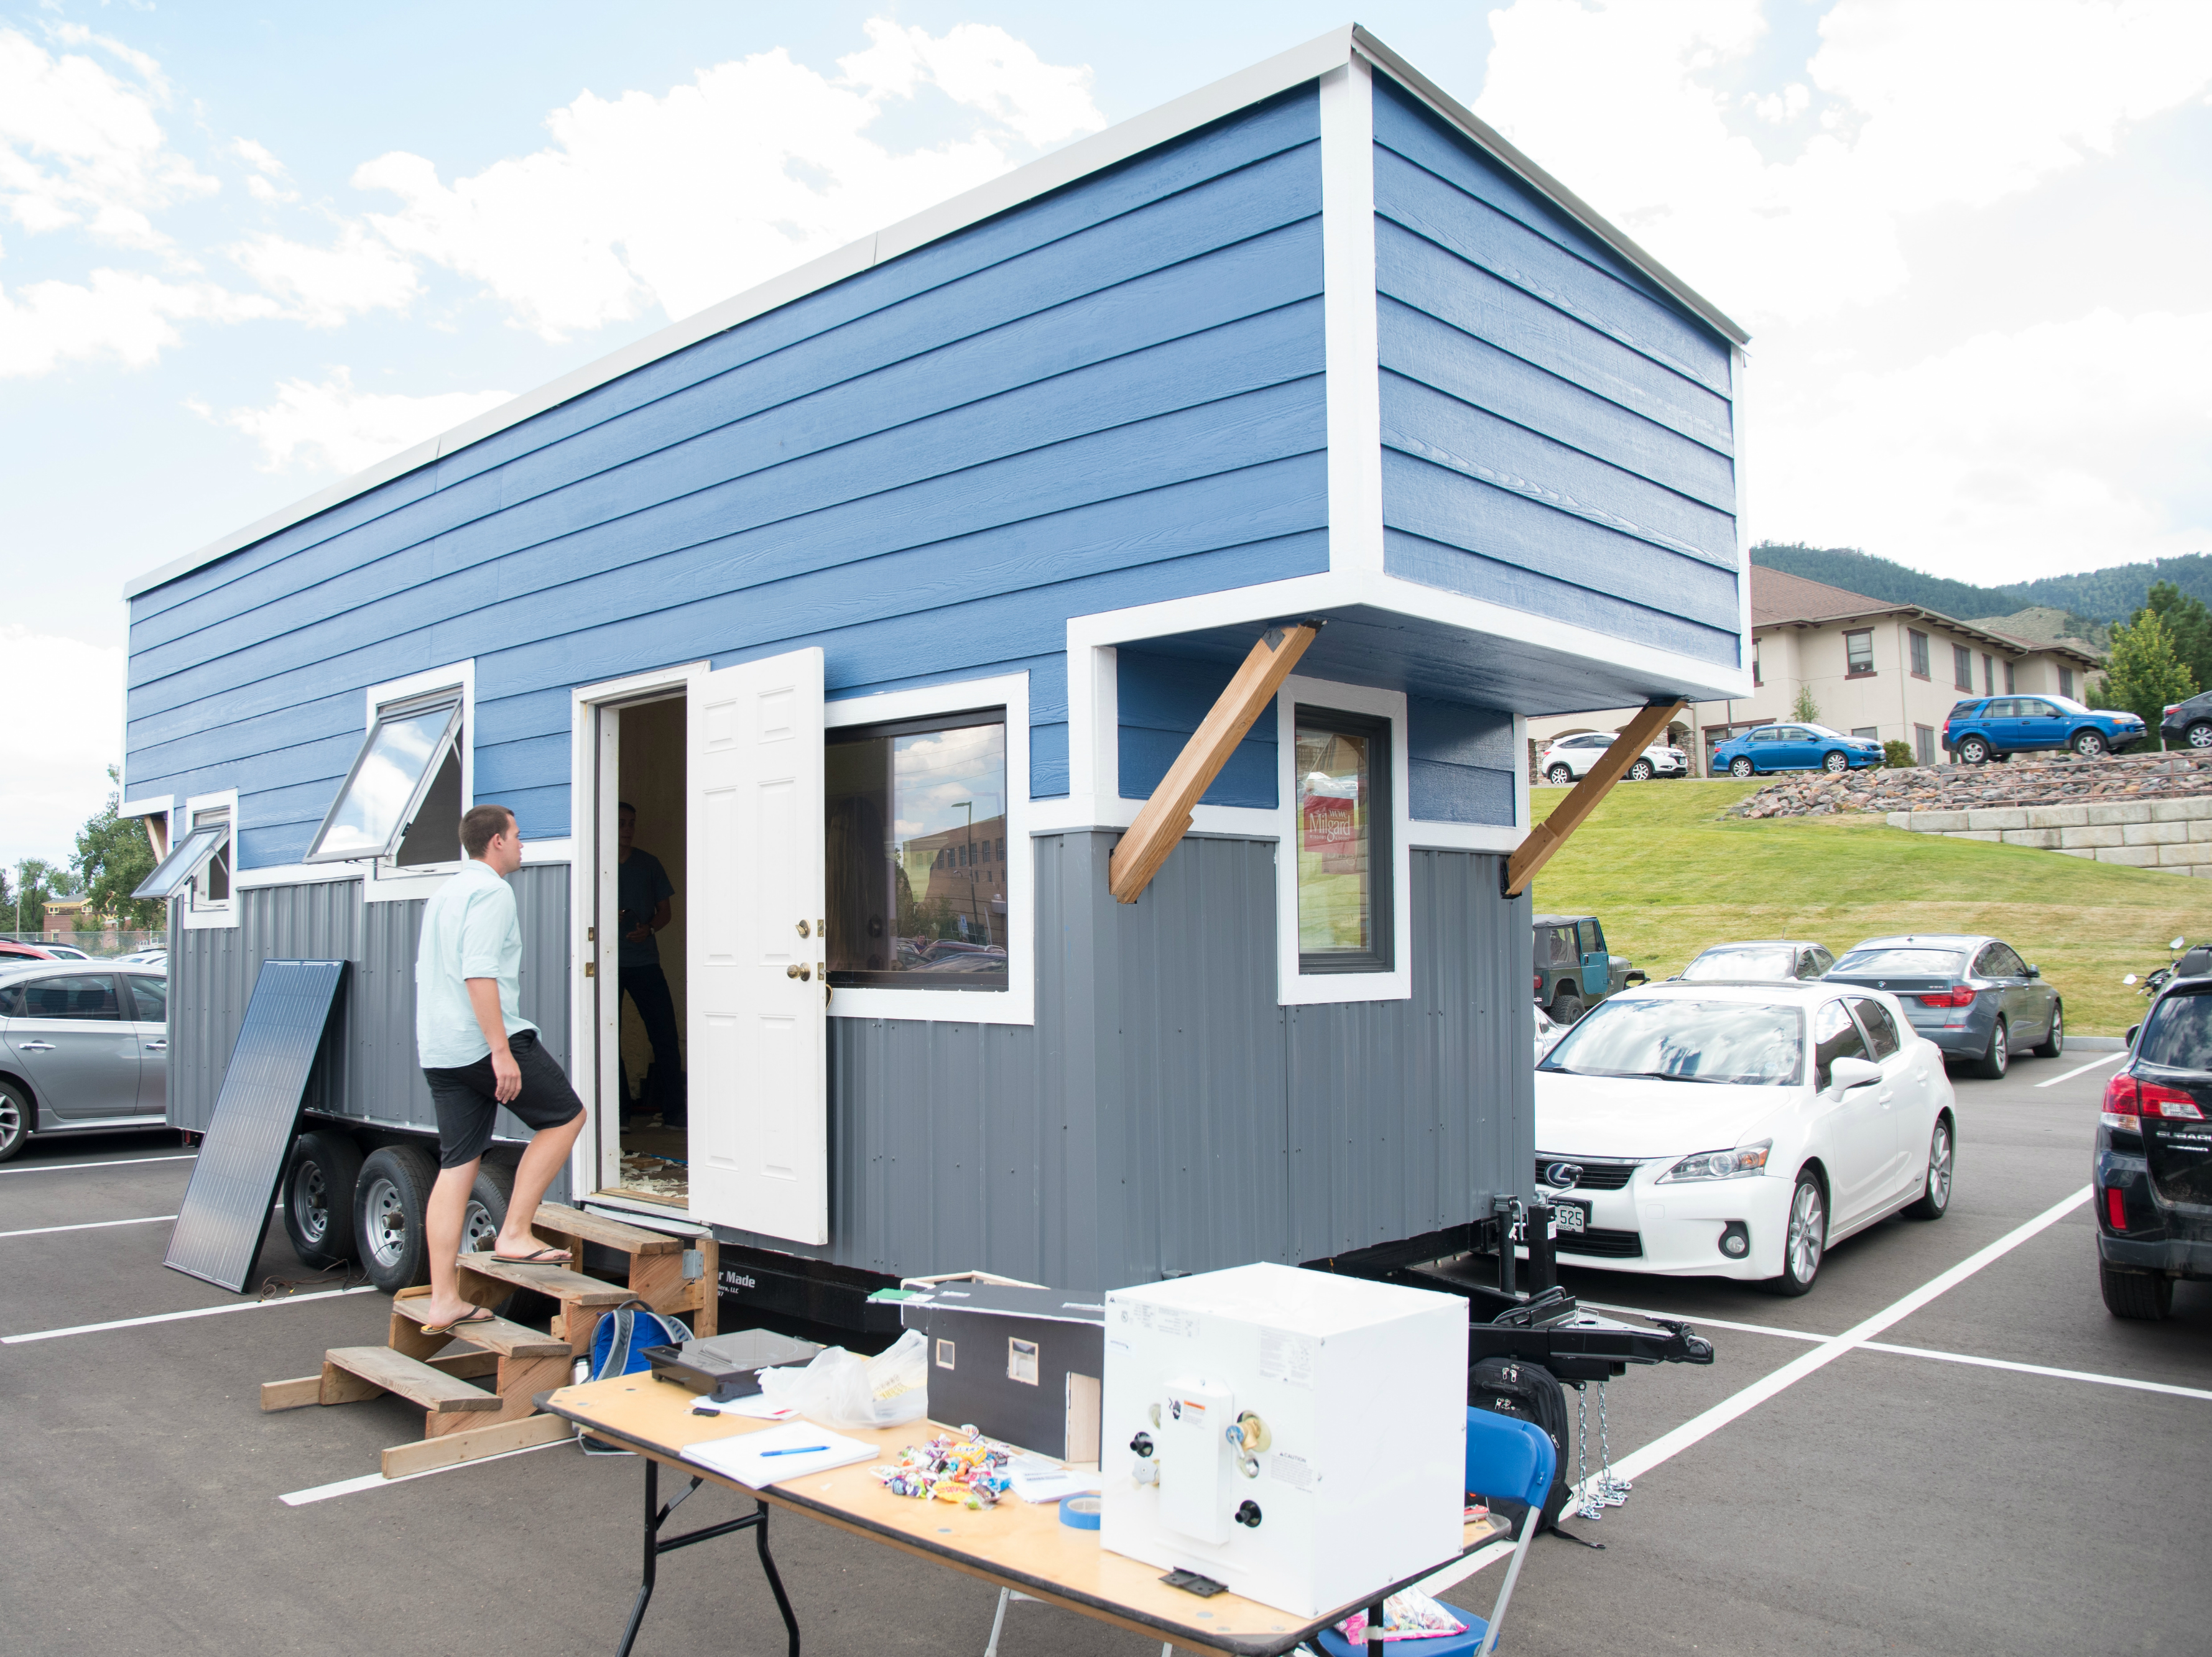 Mines Tiny House at the 2017 Celebration of Mines event